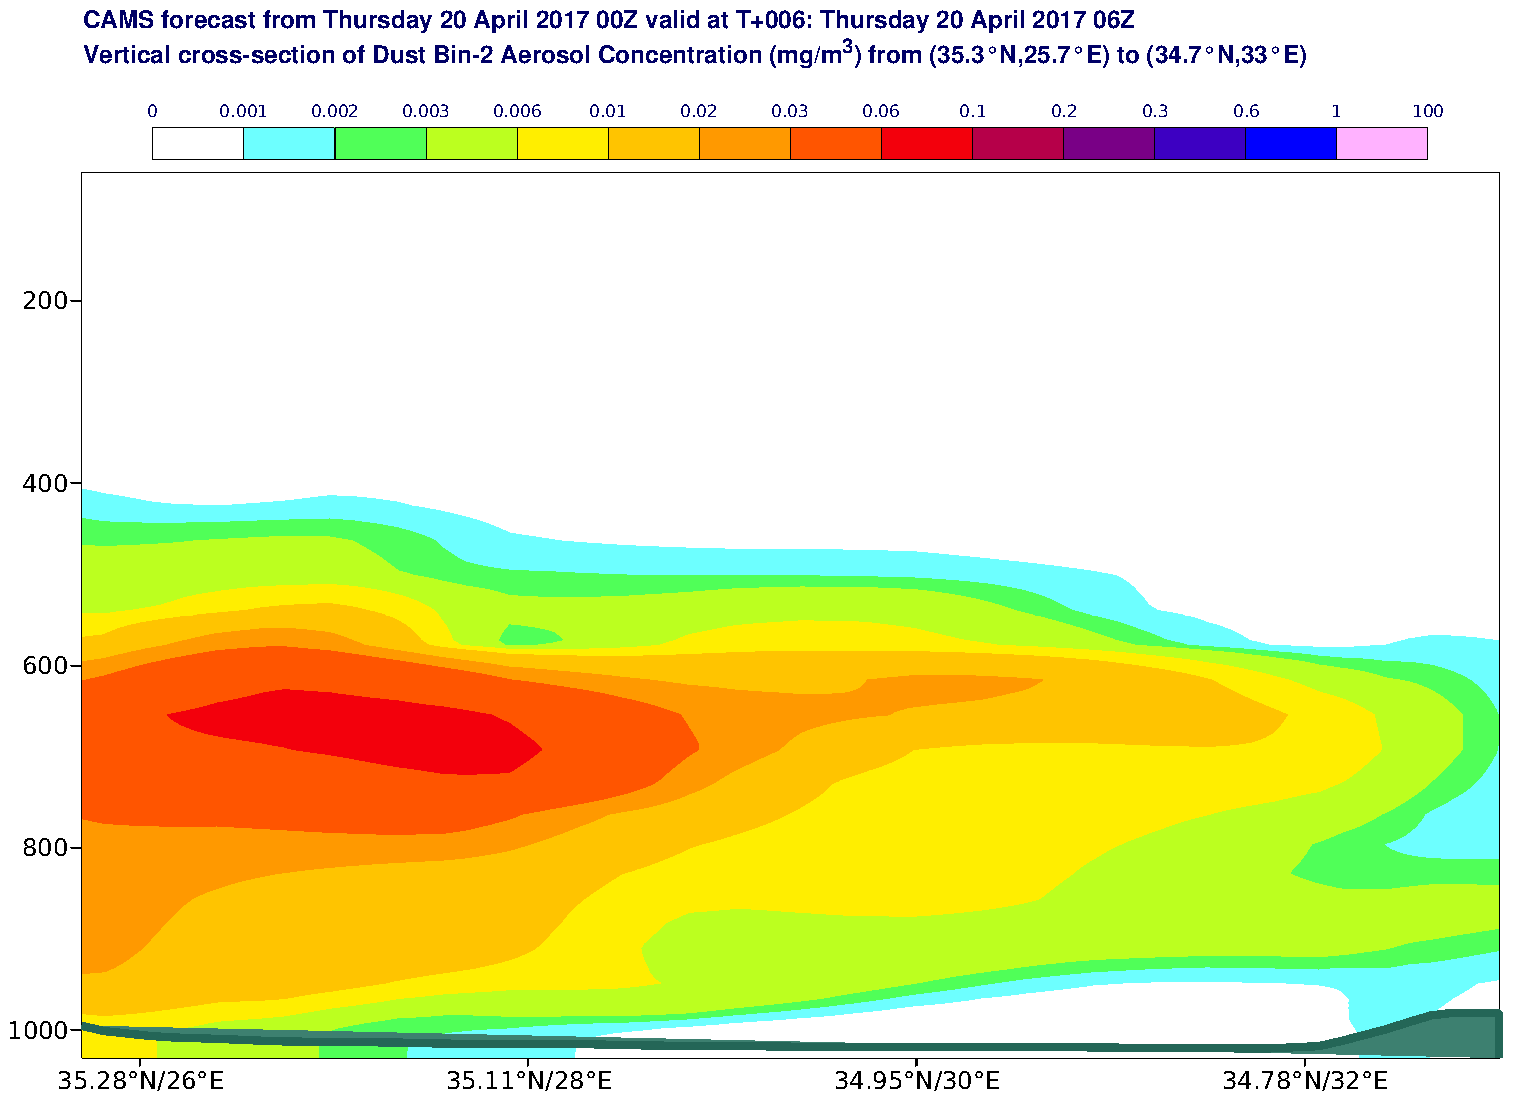 Vertical cross-section of Dust Bin-2 Aerosol Concentration (mg/m3) valid at T6 - 2017-04-20 06:00